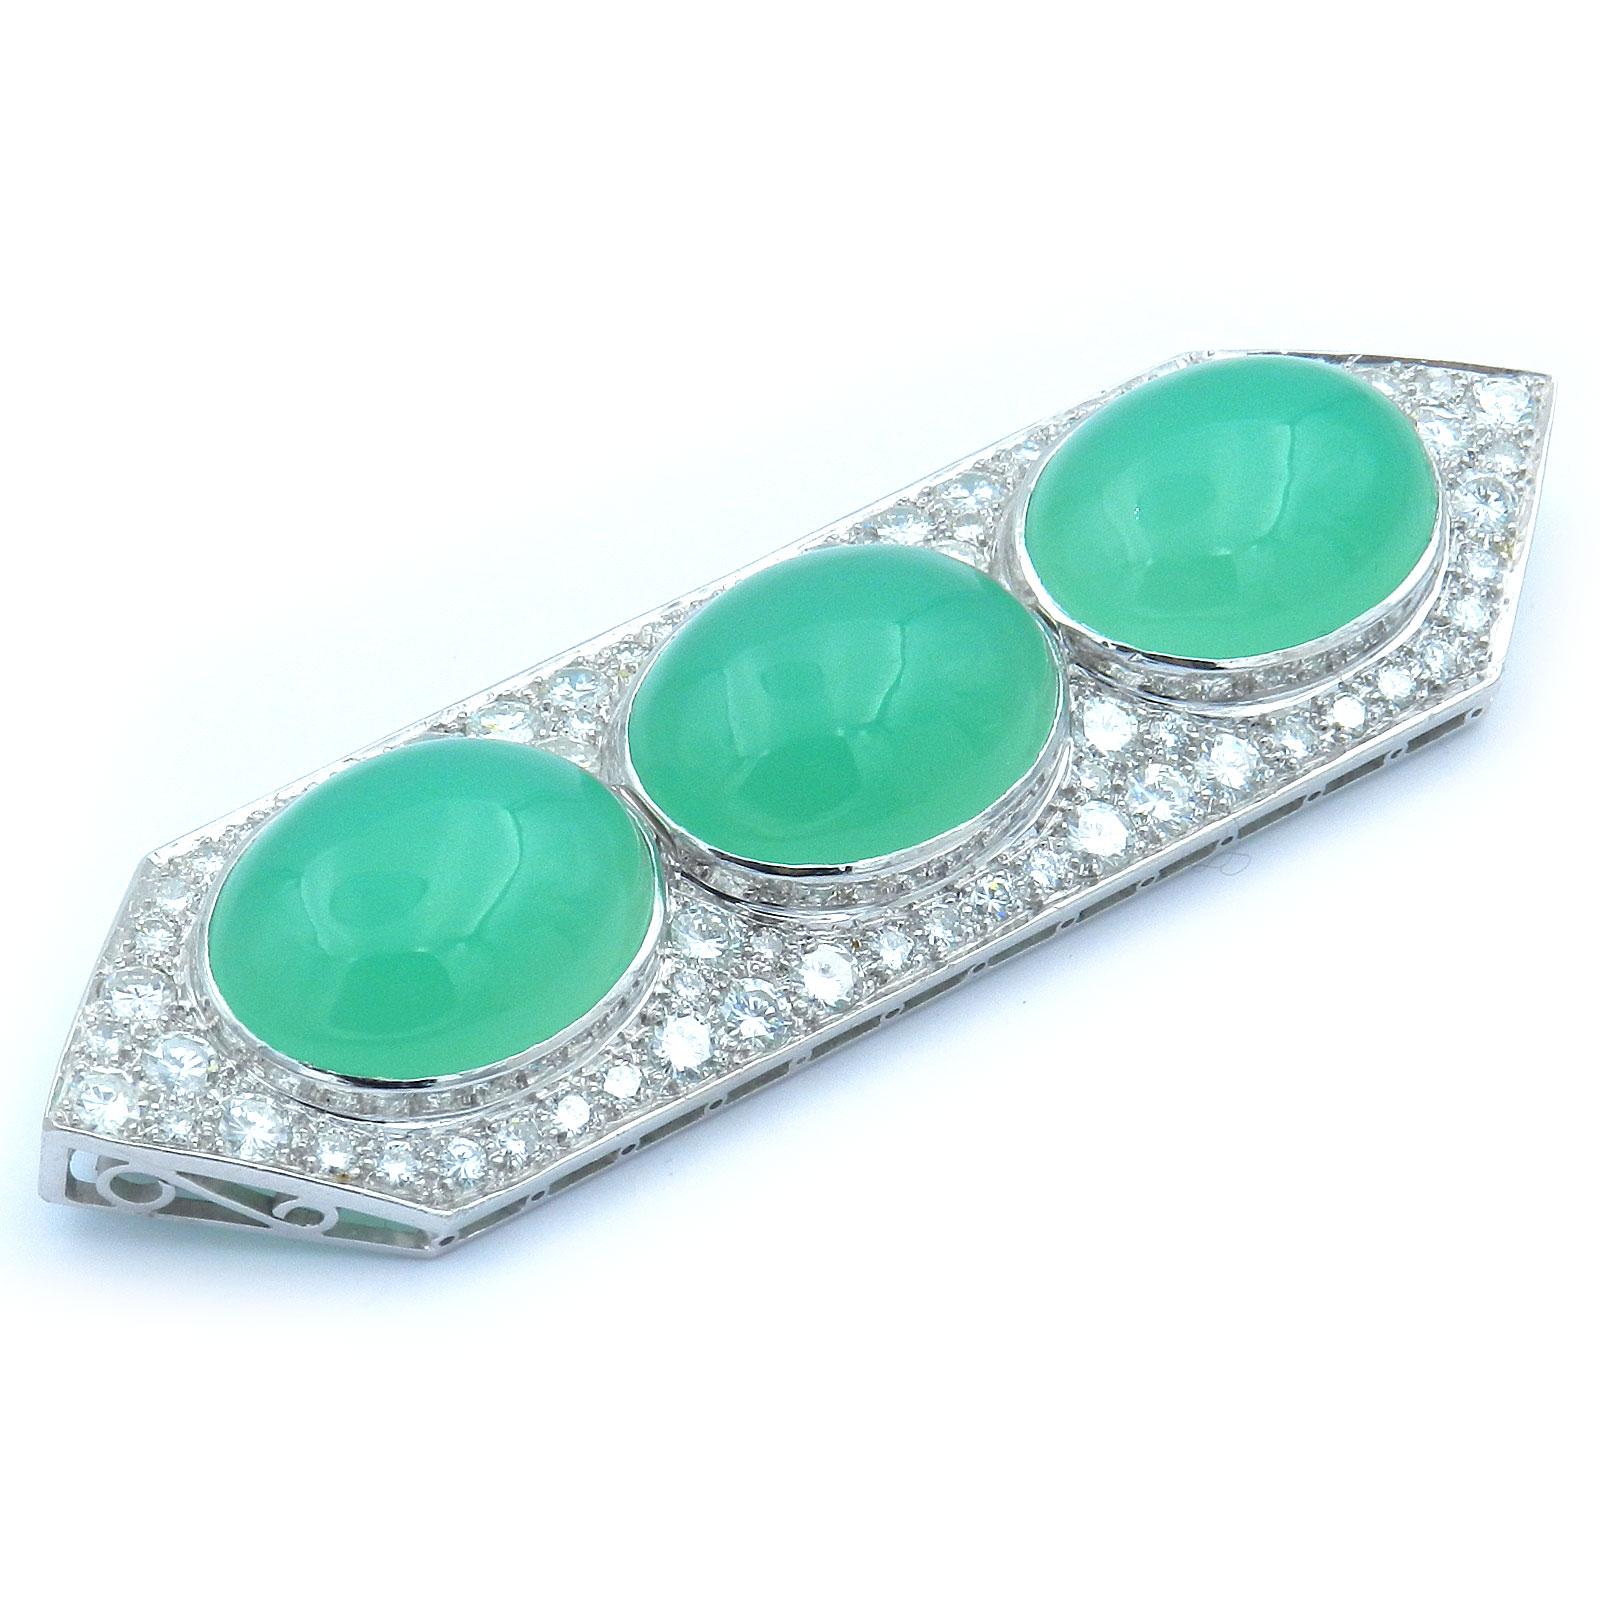 5.5 Carat Diamond Chrysoprase in 18K White Gold Brooch 

Magnificent diamond brooch made of 18-carat white gold in an elongated, geometric shape, centrally set with three luminous green chrysoprase cabochons and 74 radiant brilliant-cut diamonds